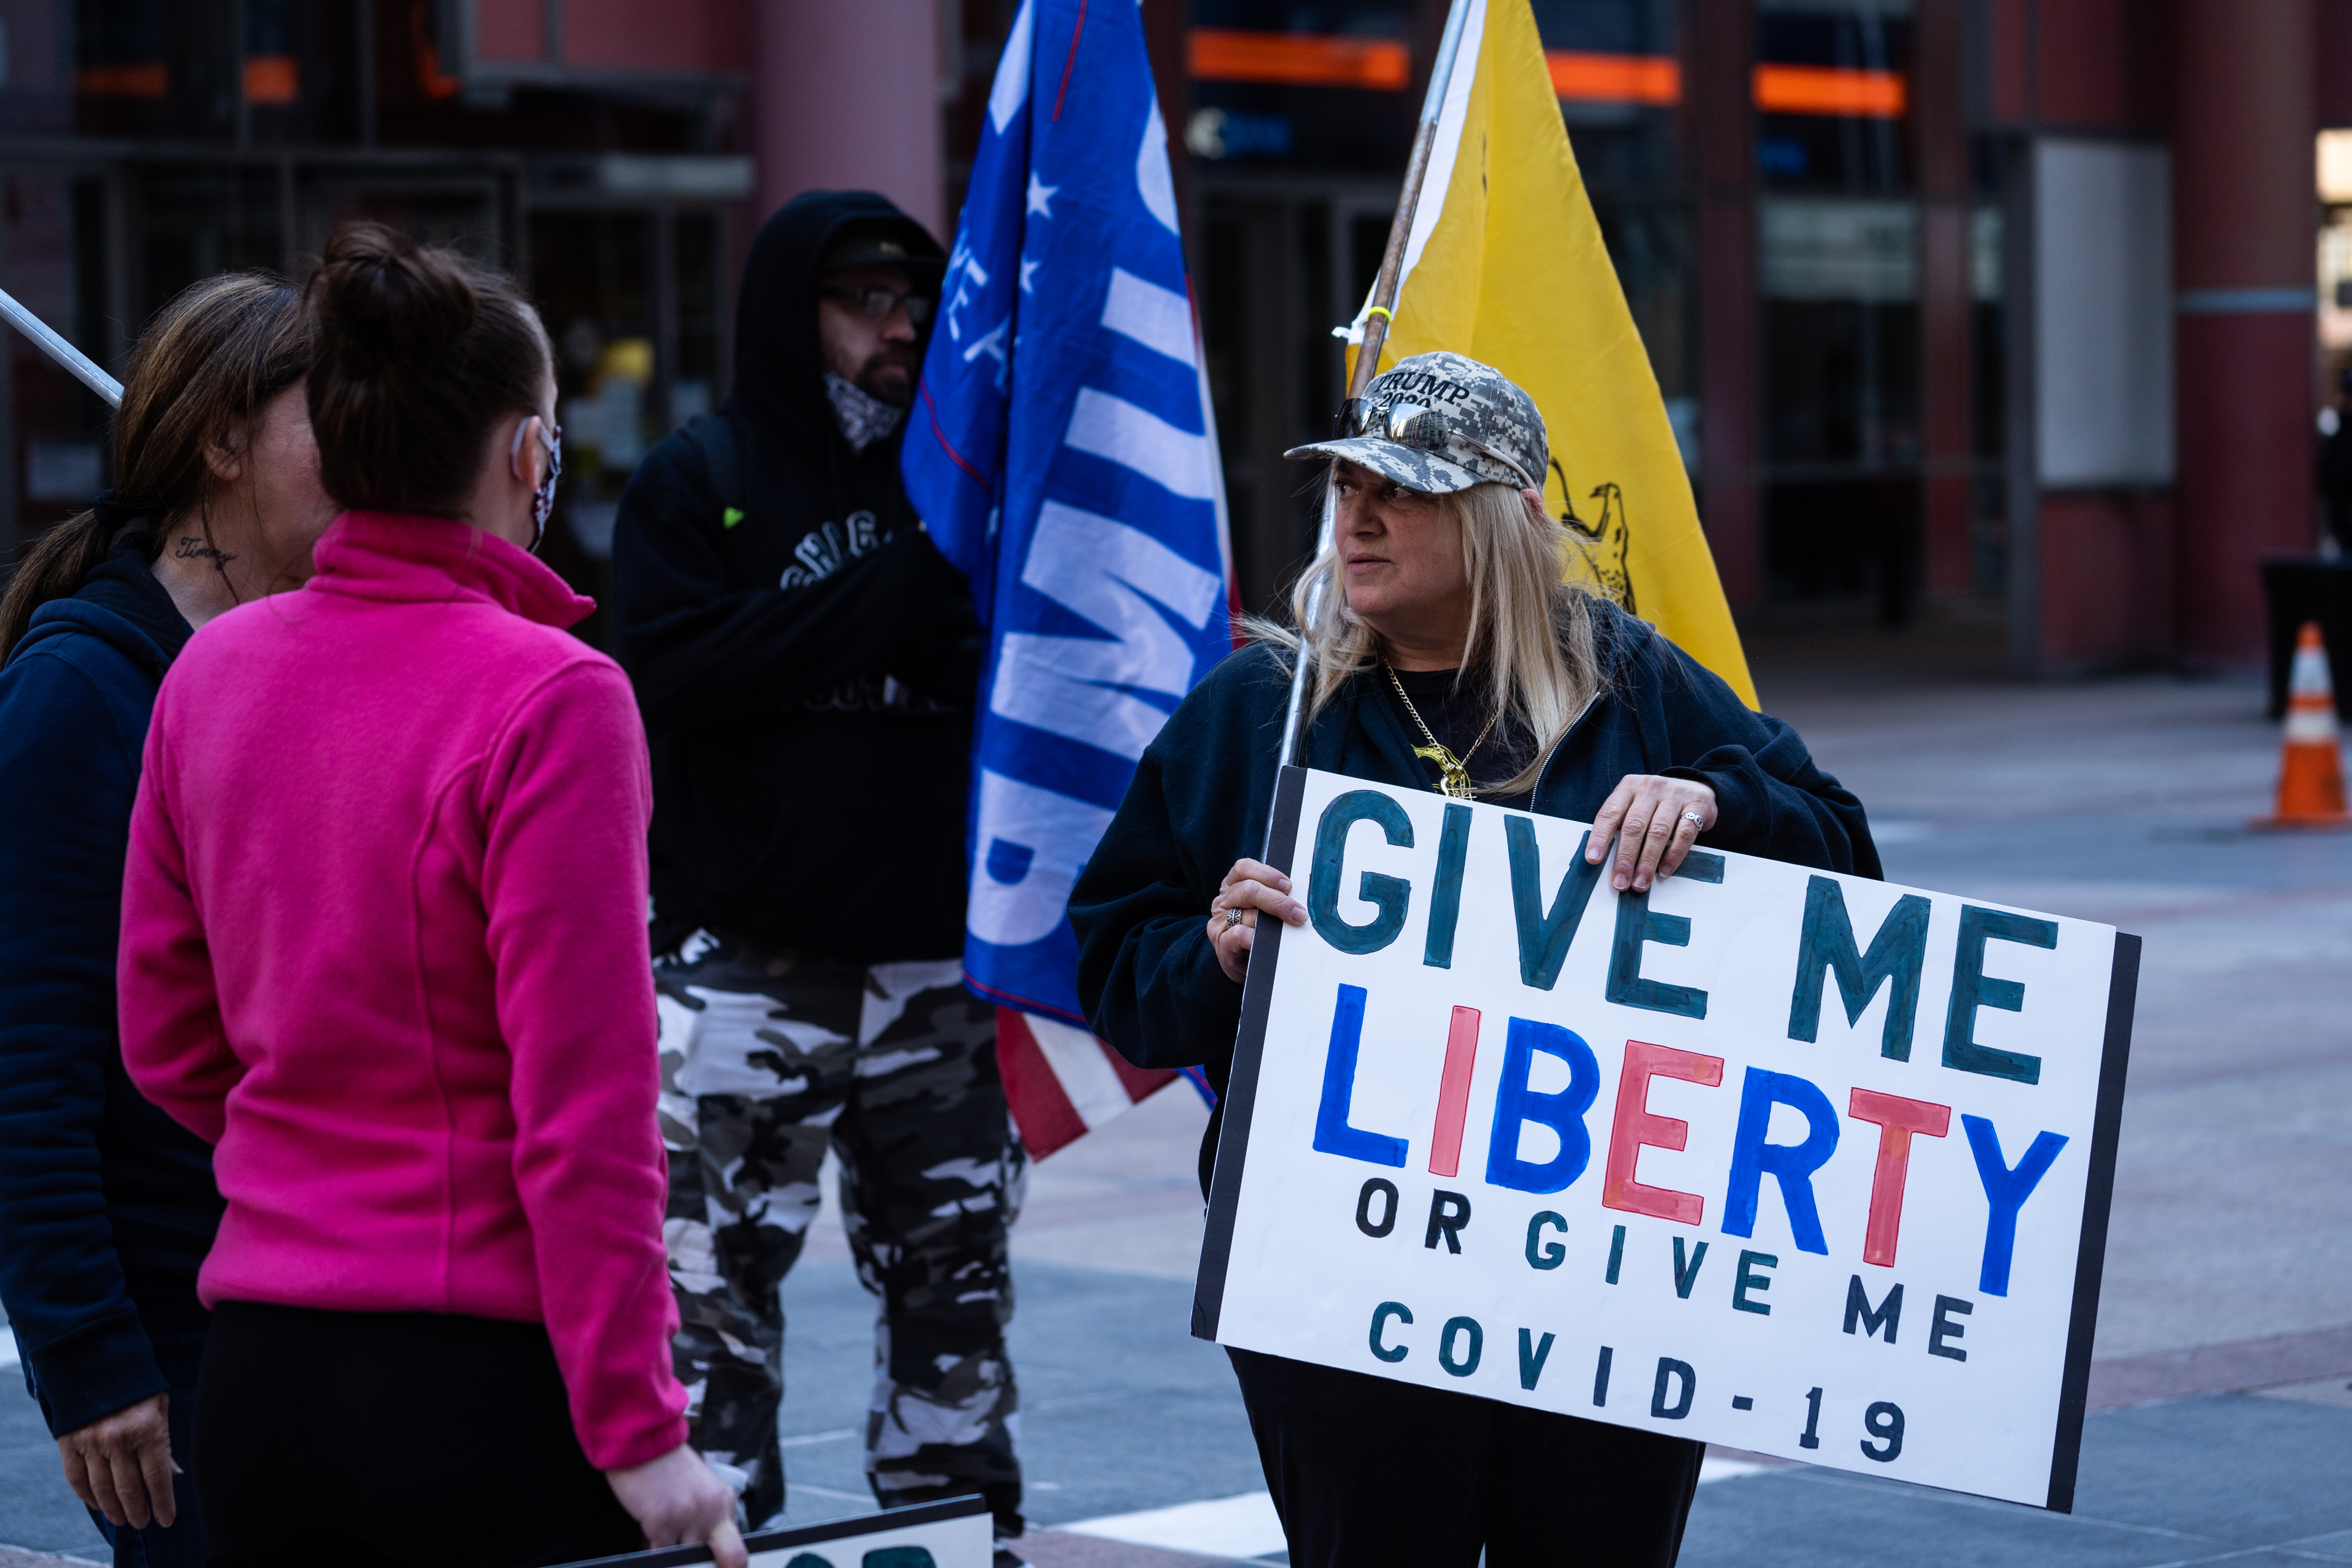 A Donald Trump supporter protests the extension of the stay-at-home order outside the Thompson Center in Chicago on May 1, 2020. The modified stay-at-home order by Illinois Governor J.B. Pritzker runs through the end of May to slow the spread of COVID-19 and now requires people to wear a face covering when entering businesses or when social distancing in public places is not possible. (Photo by Max Herman/Sipa USA)No Use UK. No Use Germany.